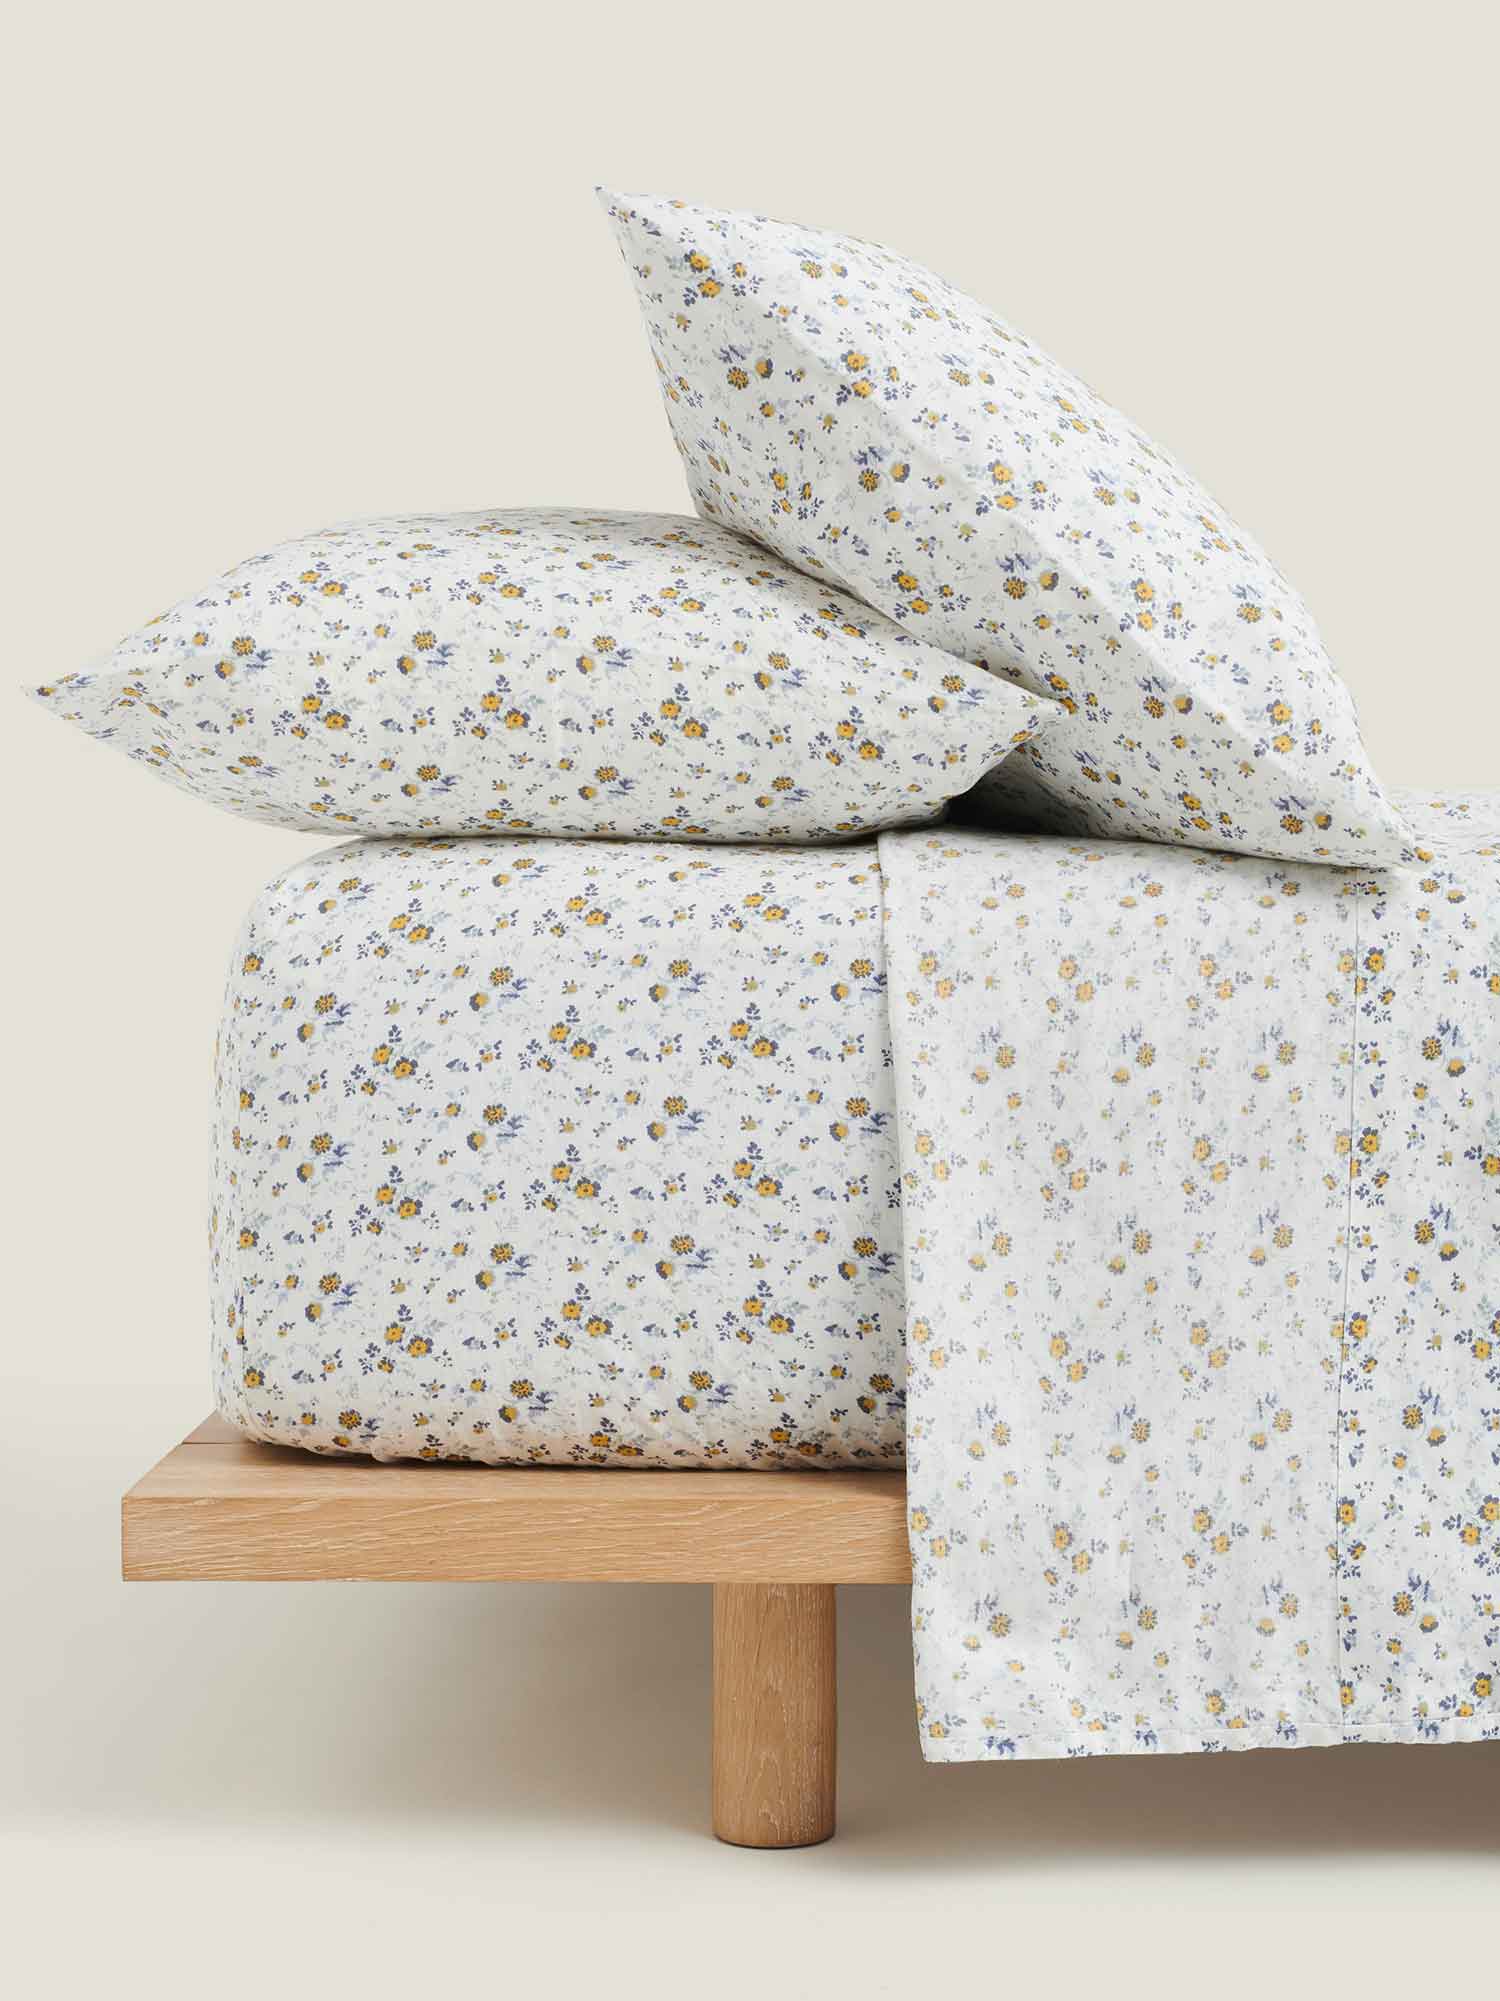 100% Linen Pillowcase Set (of two) in Summer Floral